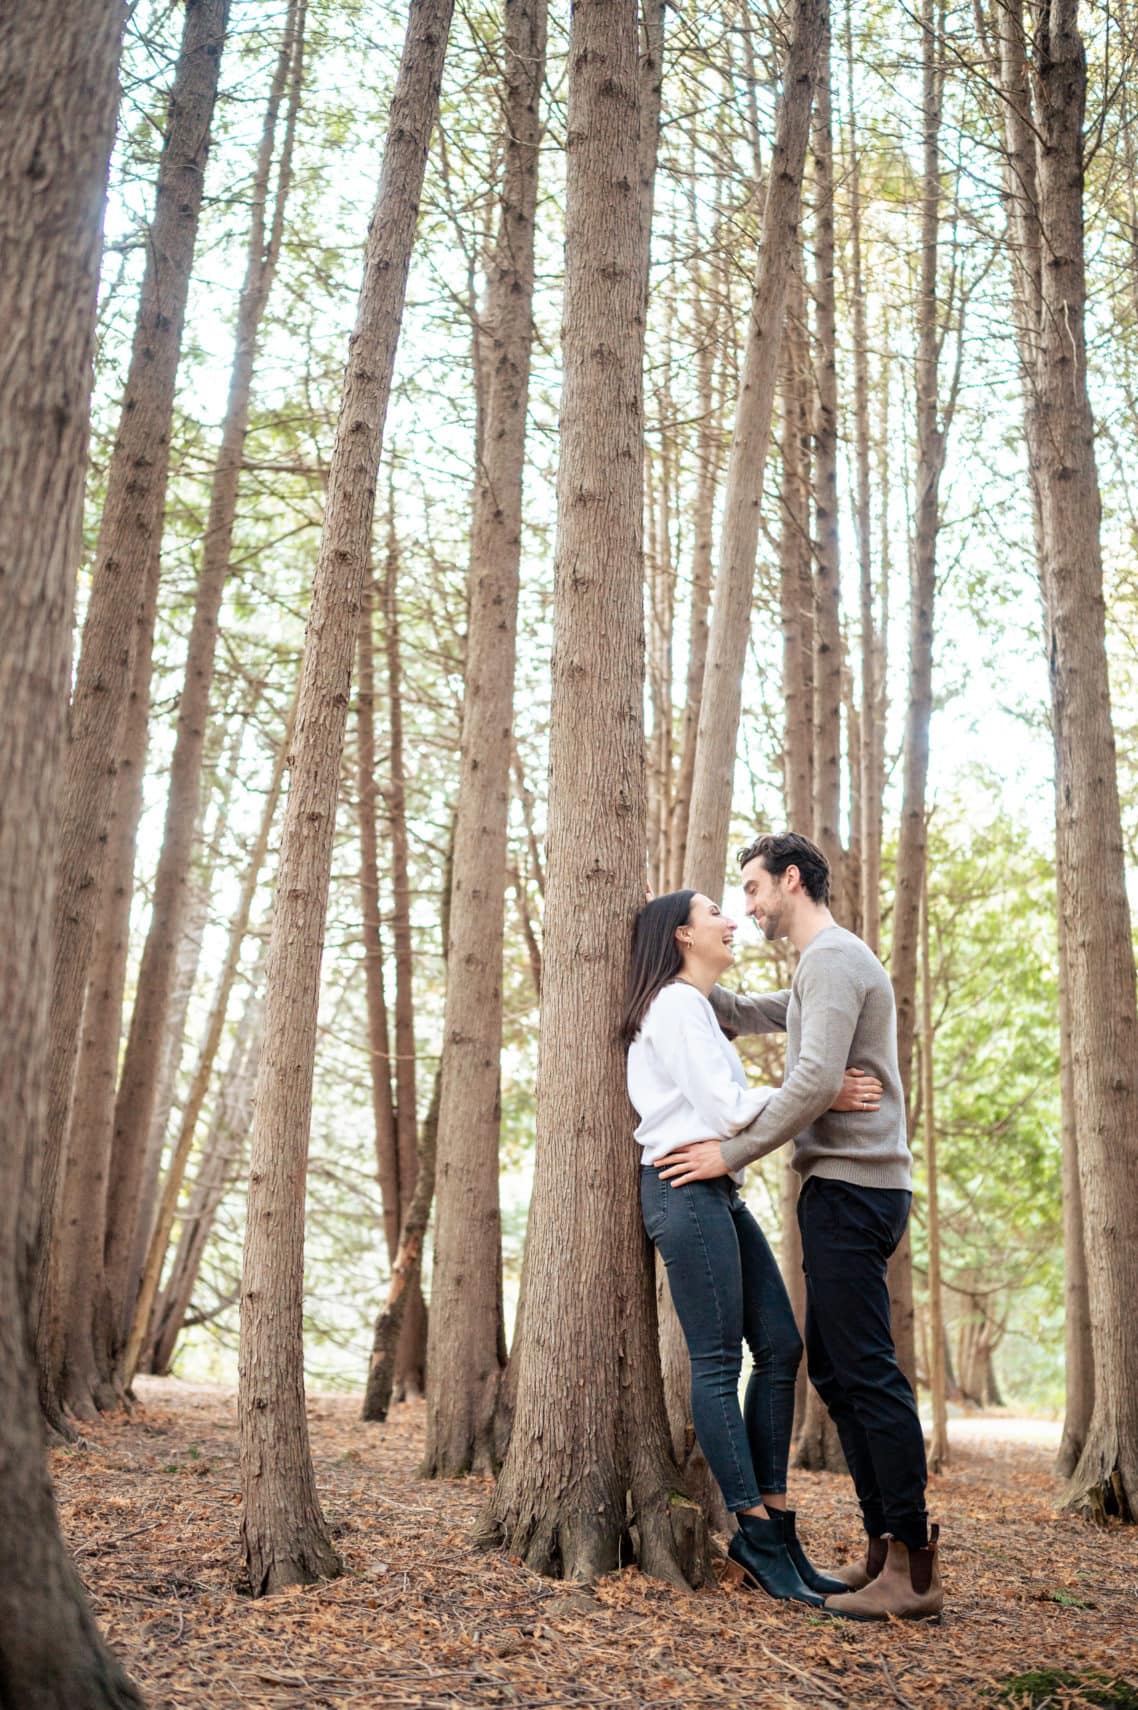 cullen park engagement photos by Durham Region Wedding Photographer Brian Ly Photography